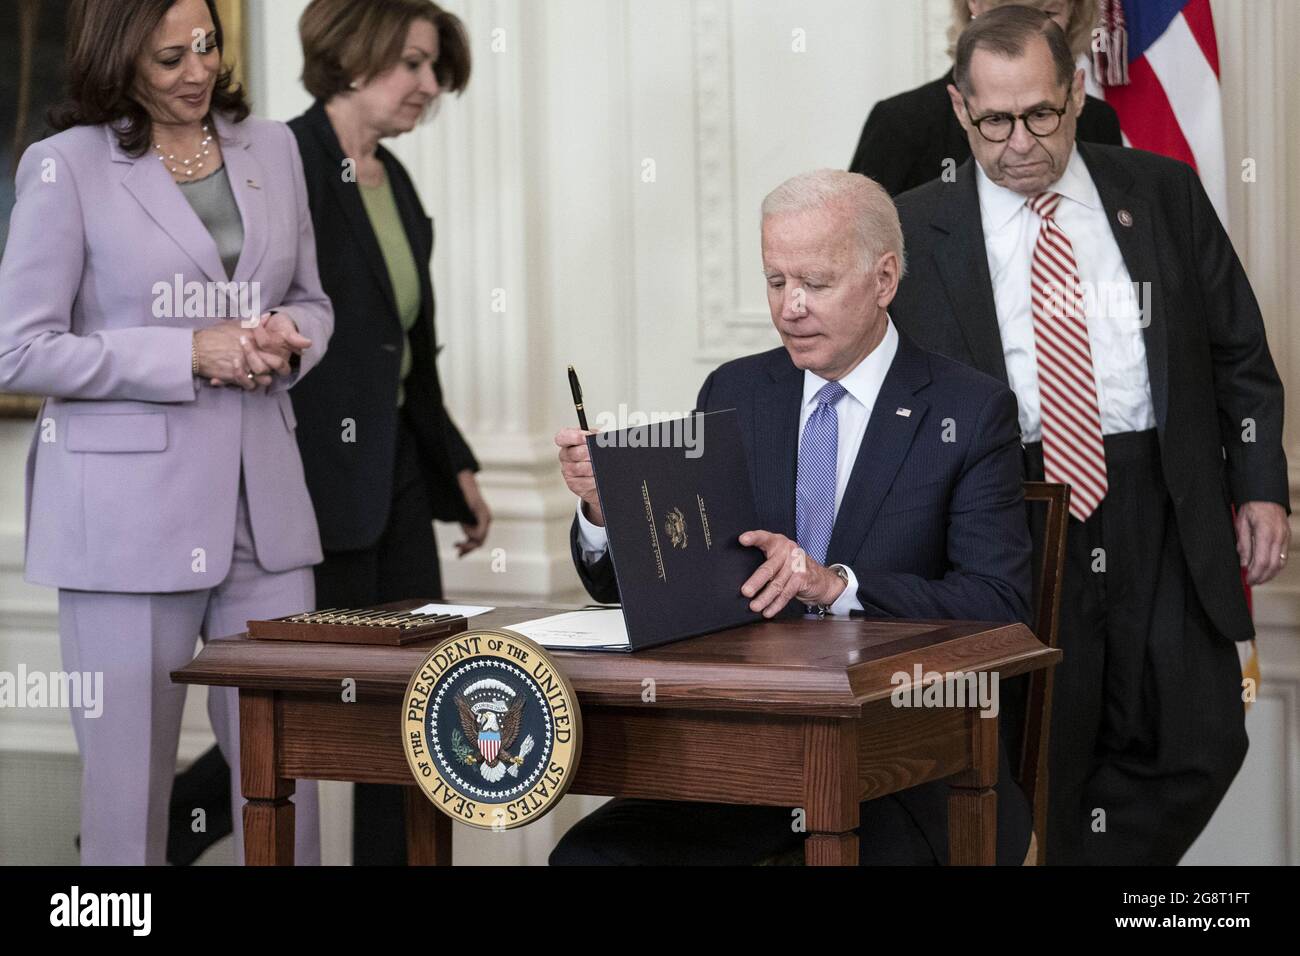 Washington, United States. 22nd July, 2021. President Joe Biden prepares to sign H.R. 1652, the VOCA Fix to Sustain the Crime Victims Fund Act of 2021, into law in the East Room of the White House in Washington, DC on Thursday, July 22, 2021. President Biden was joined by a bipartisan bicameral group of lawmakers. Photo by Sarah Silbiger/UPI Credit: UPI/Alamy Live News Stock Photo